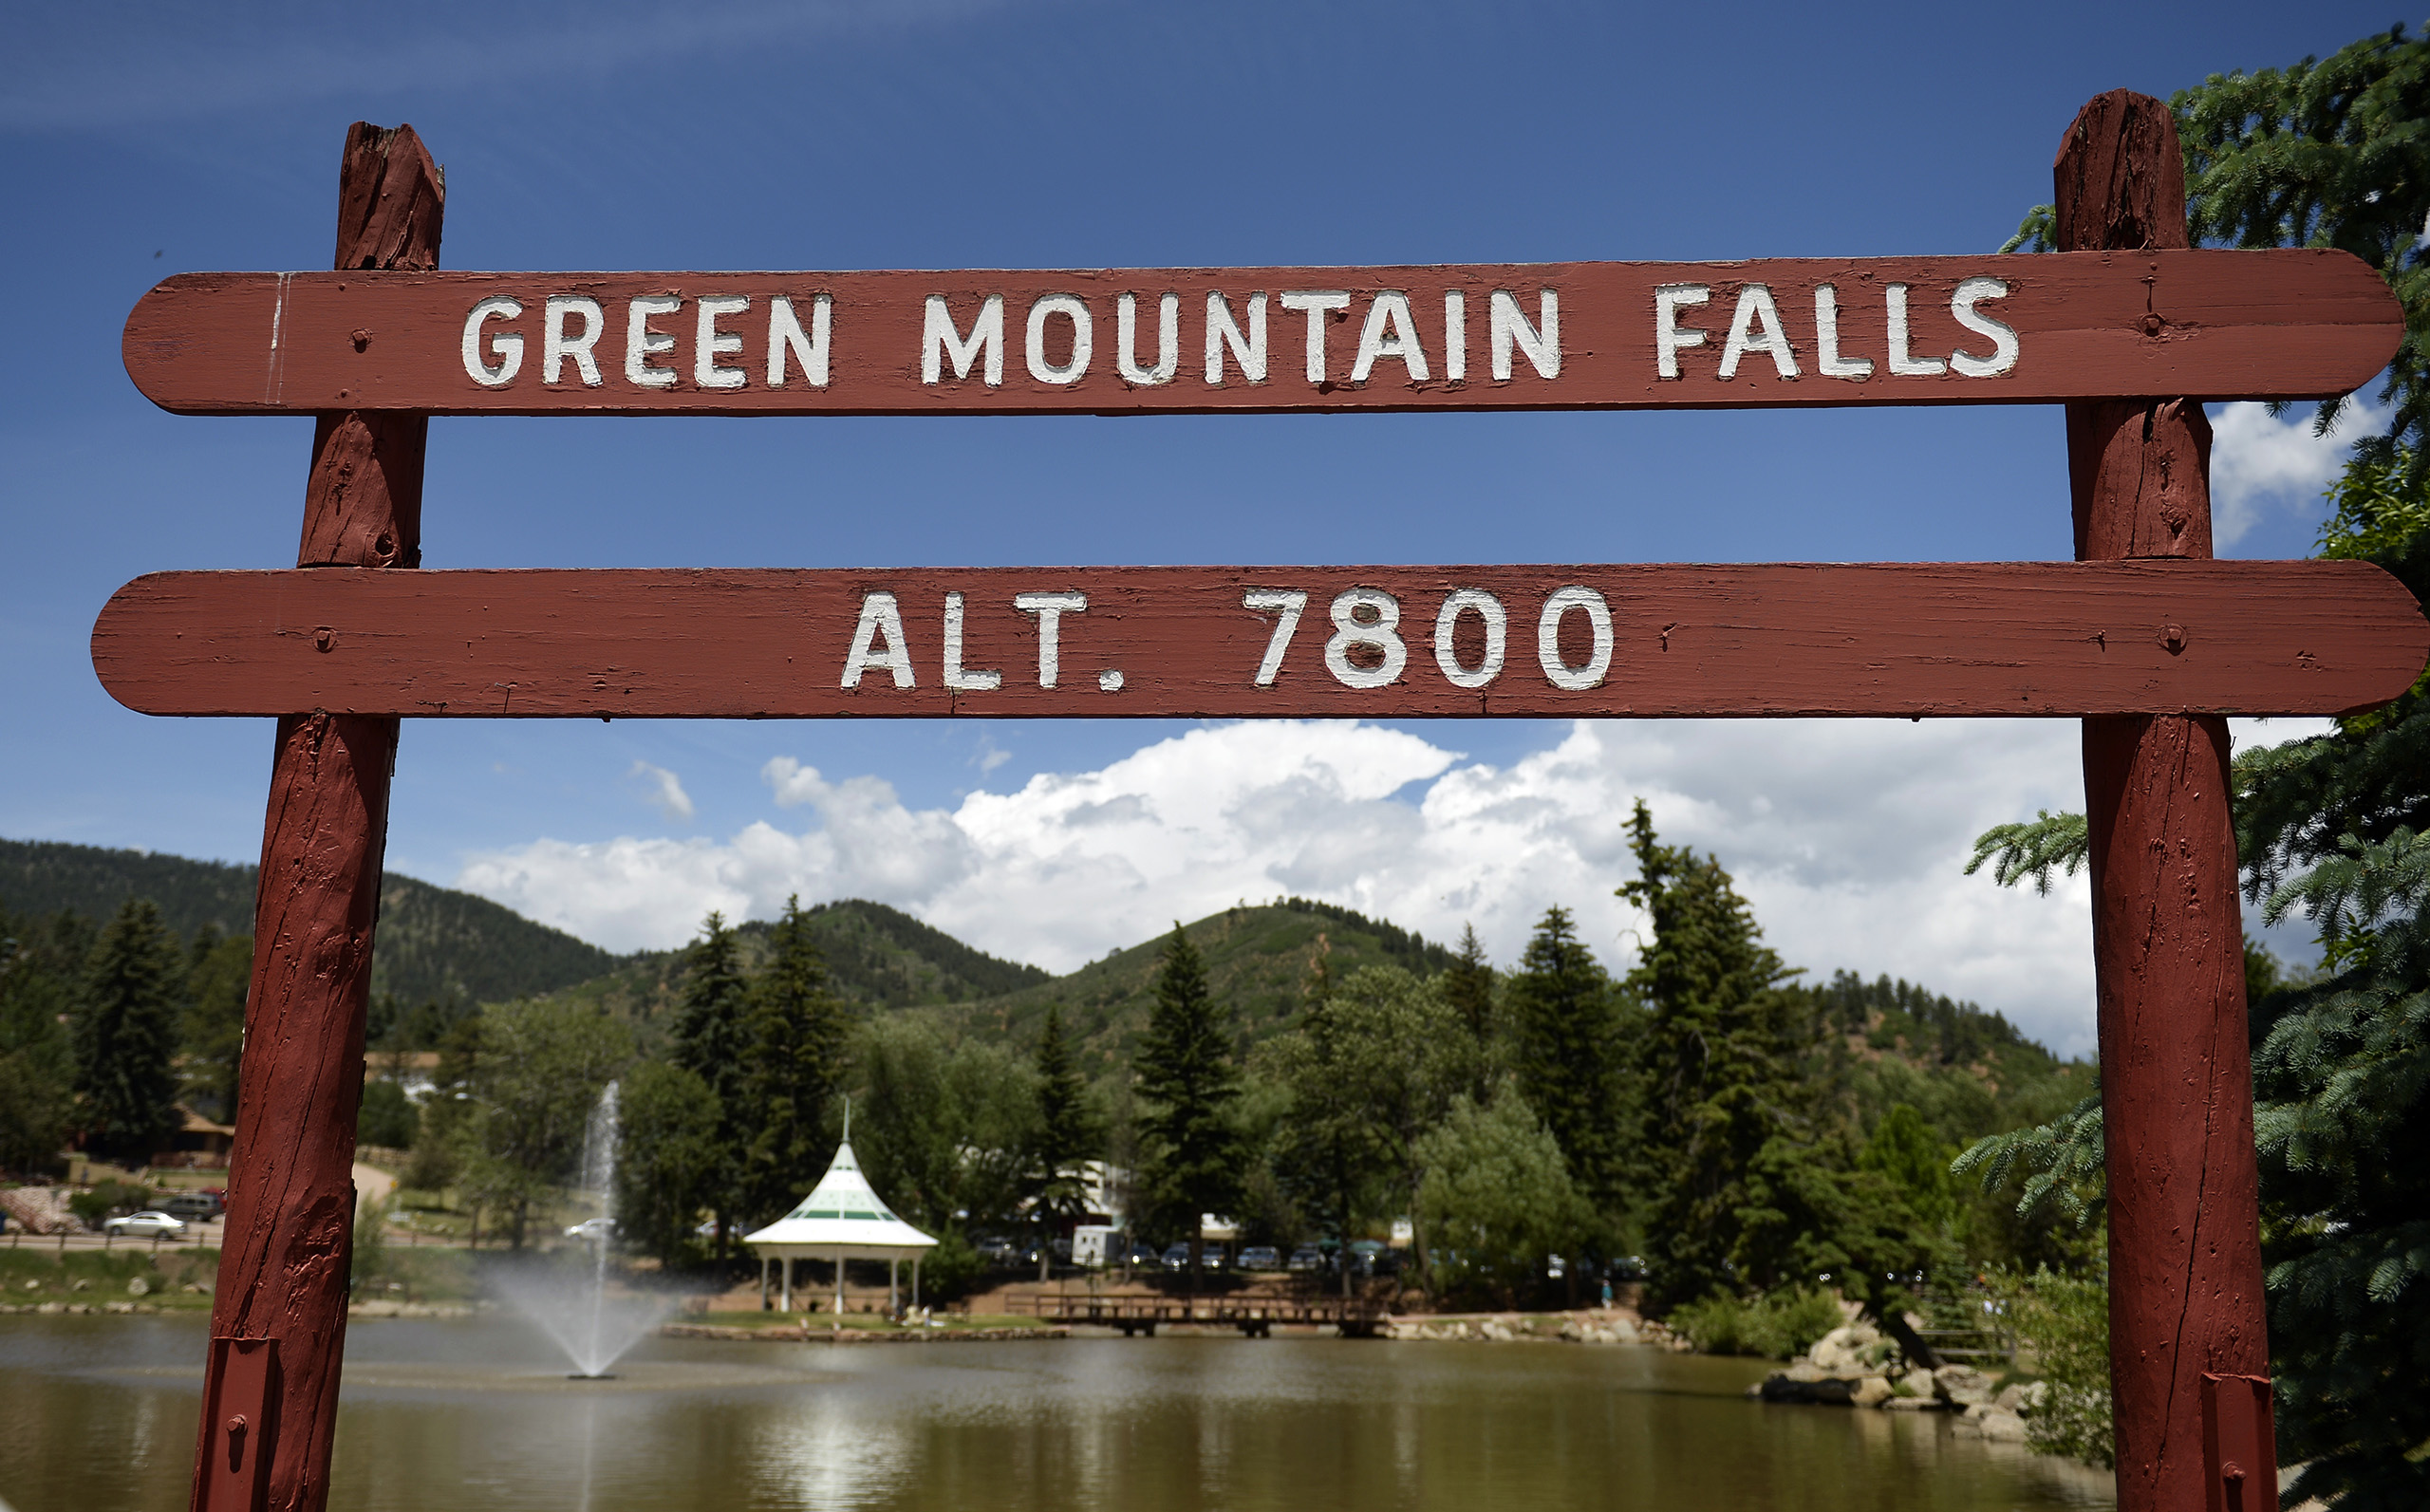 Green Mountain Falls, Colorado, on June 23, 2014. (Cyrus McCrimmon—Denver Post/Getty Images)